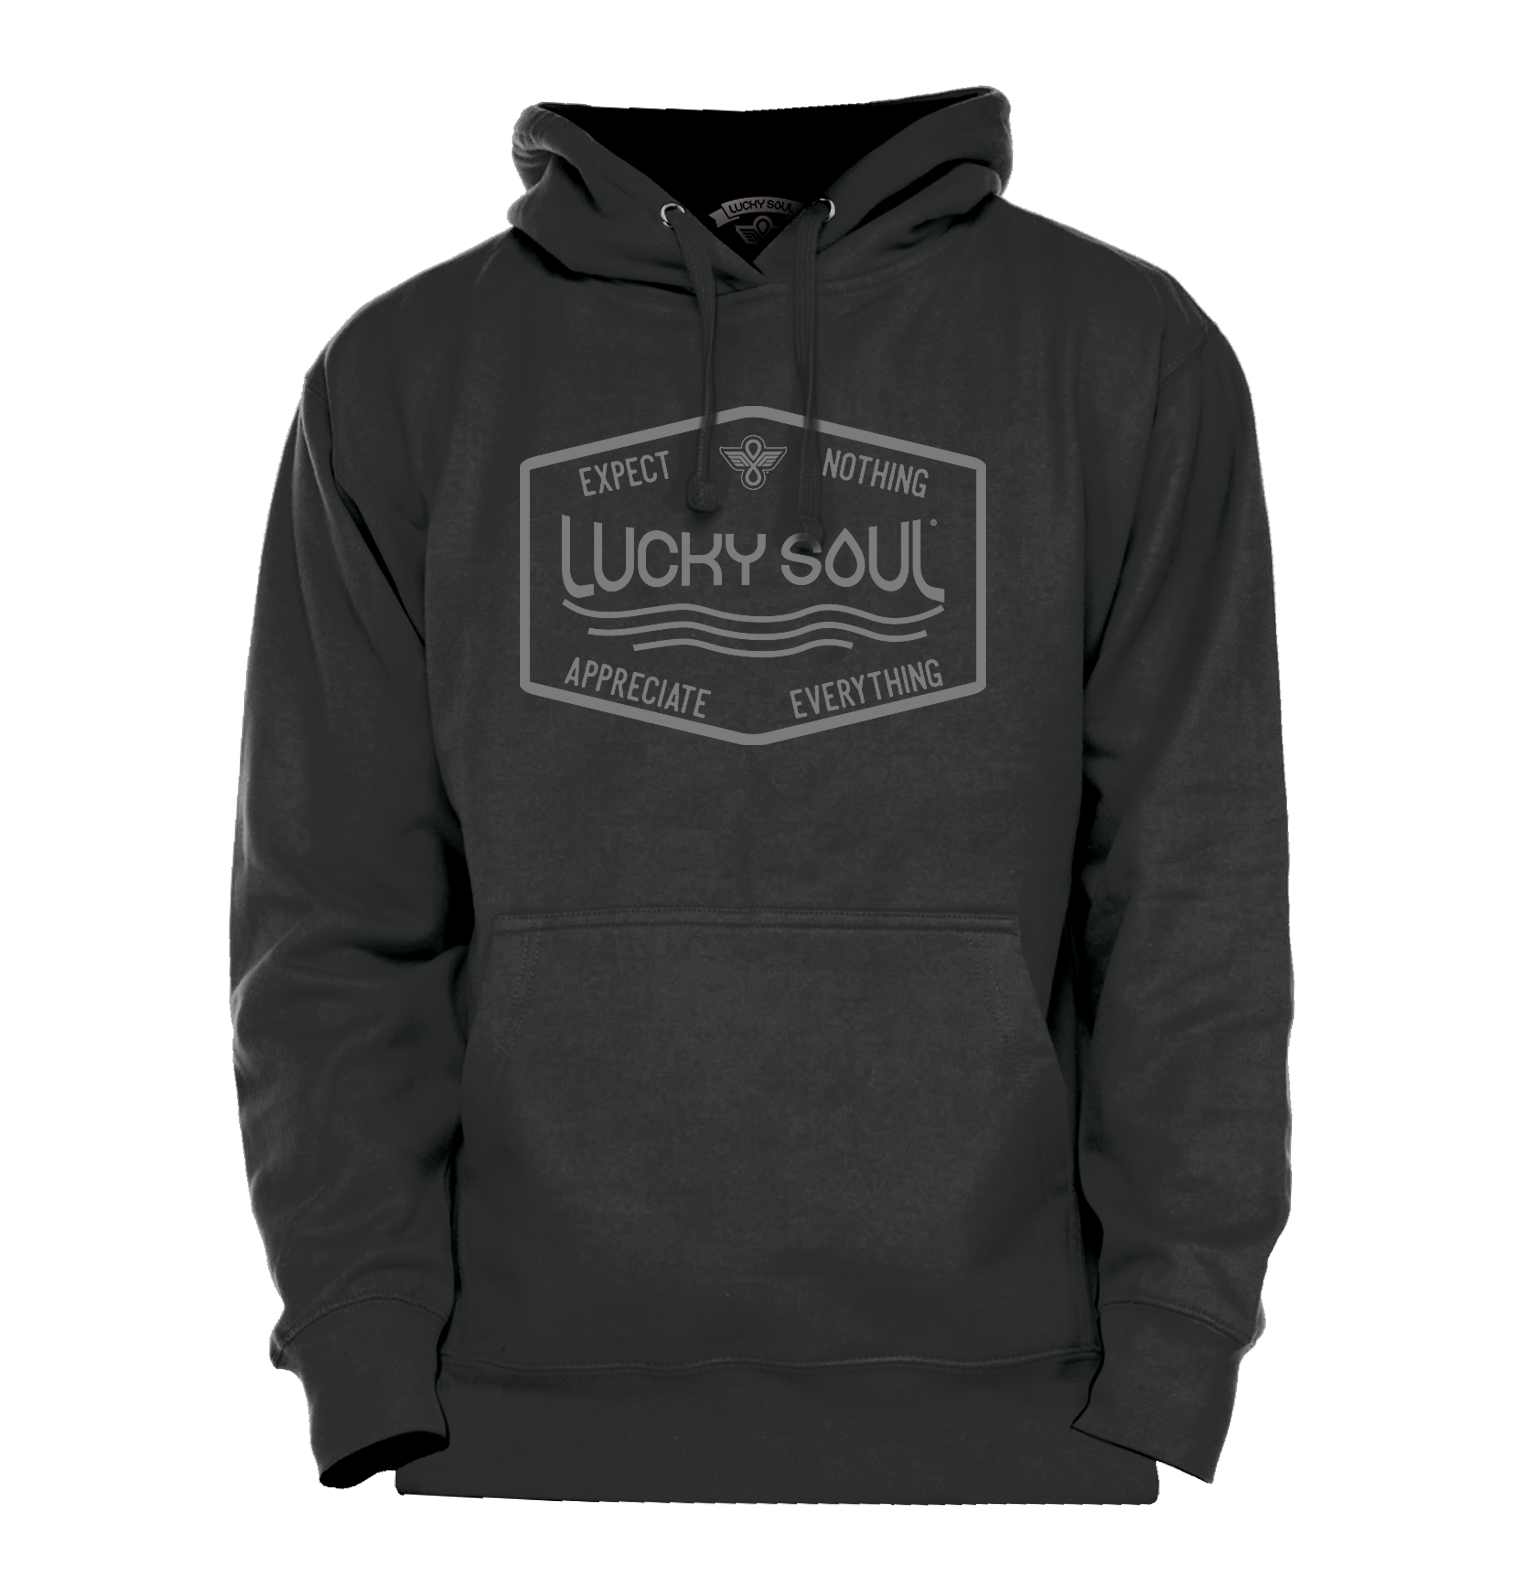 Expect Nothing, Appreciate Everything Inspirational Hoodie - Lucky Soul